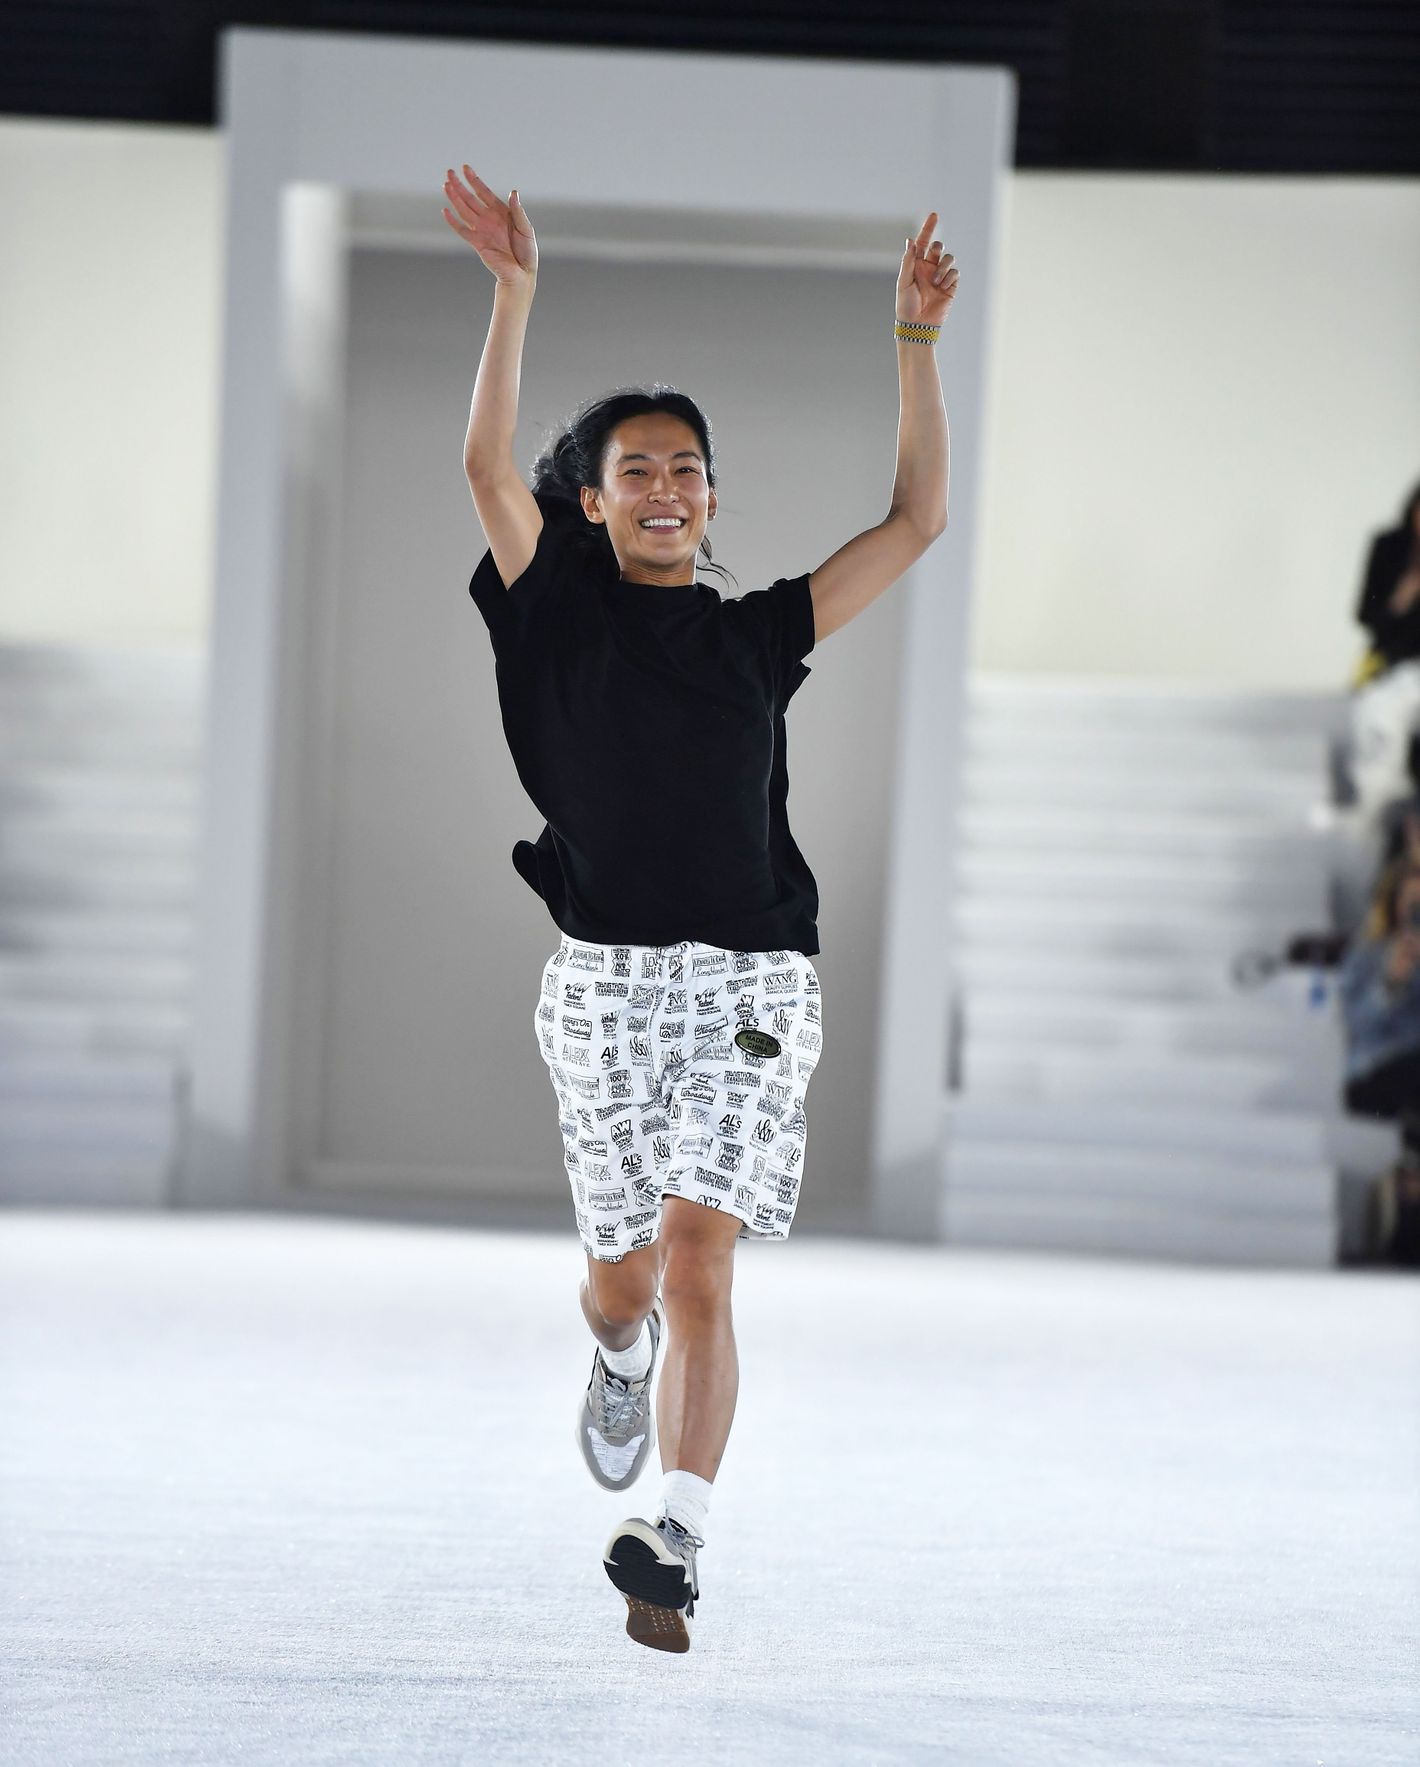 Alexander Wang based his latest collection on his family's immigration story